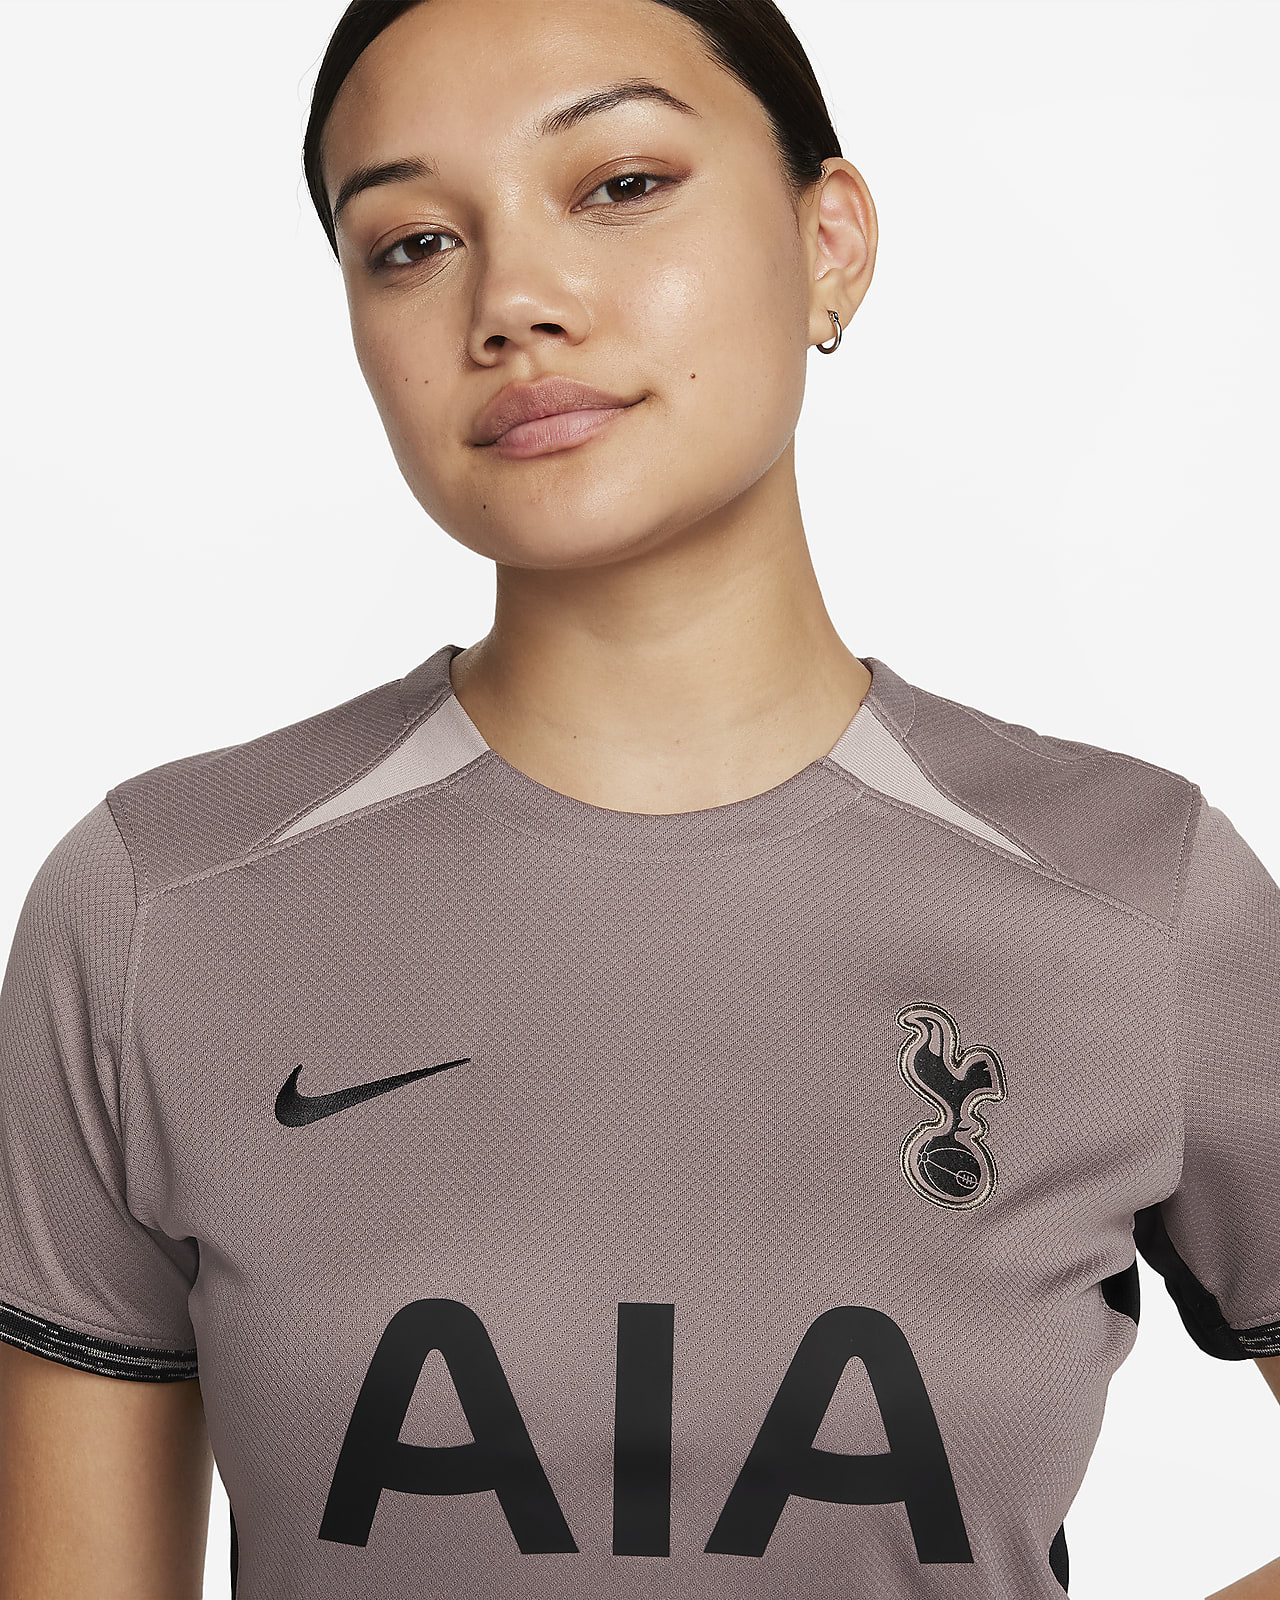 Tottenham Hotspur 23/34 Home Kit Available now at: Men's and youth